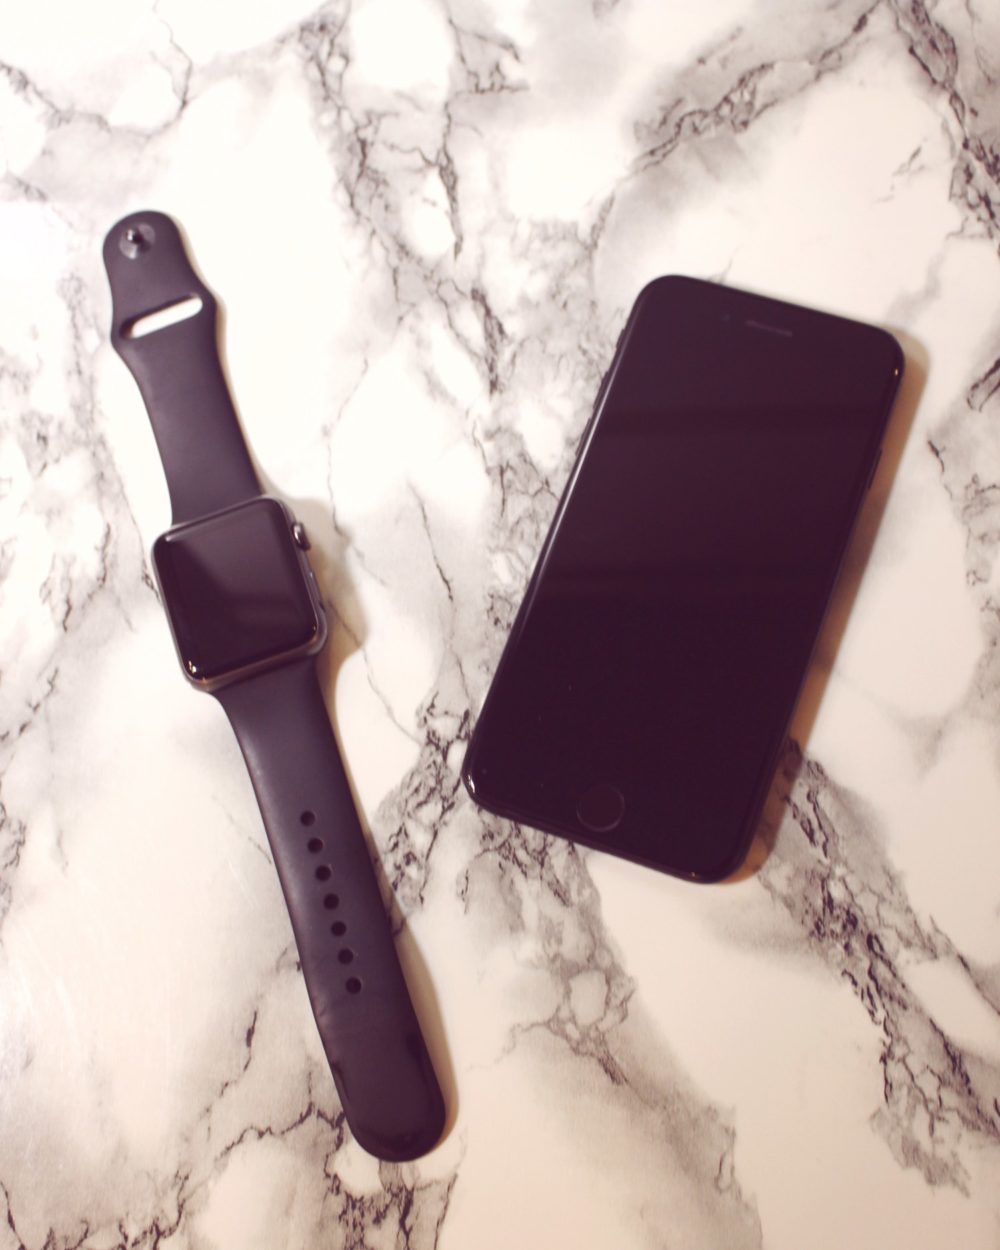 Selling iPhone 7 and Apple Watch 1st Gen on Trademore